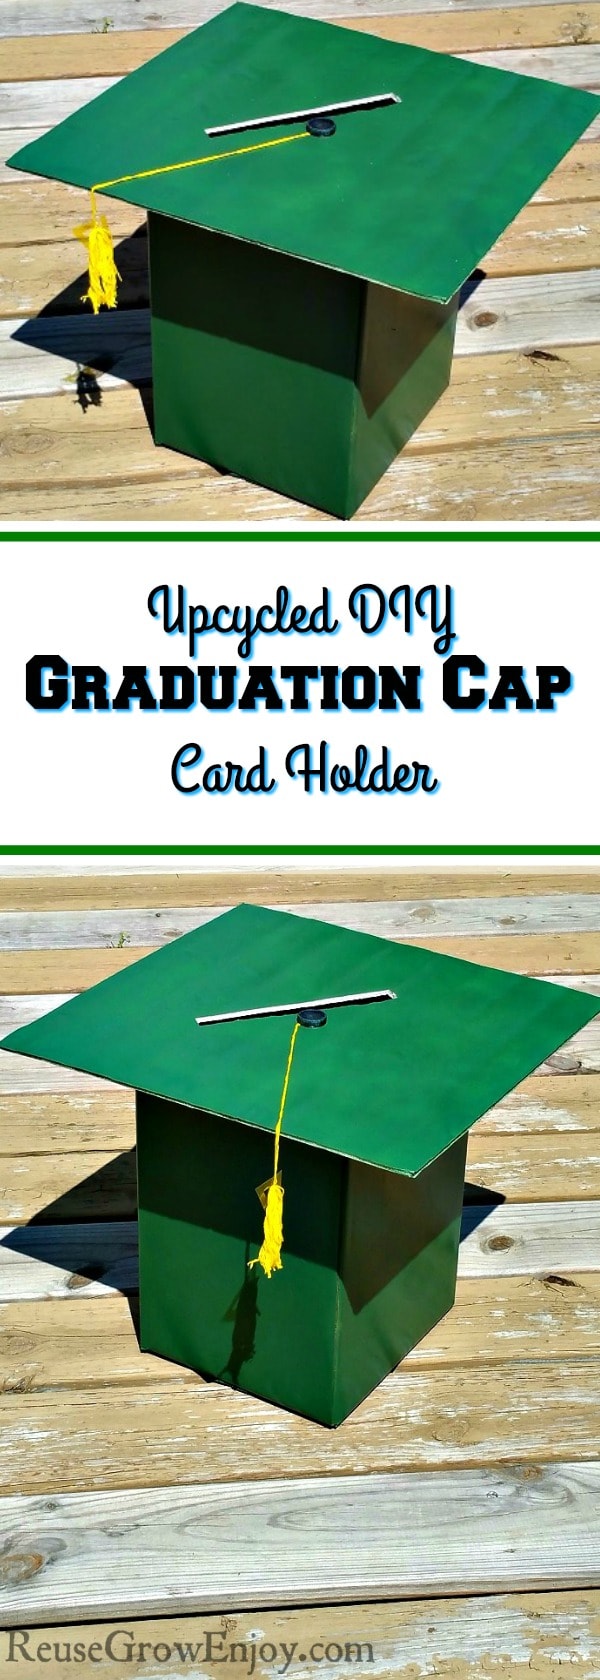 Graduation party coming up? Check out this upcycled DIY Graduation Cap Card Holder! Plus you can make it in your own school colors!